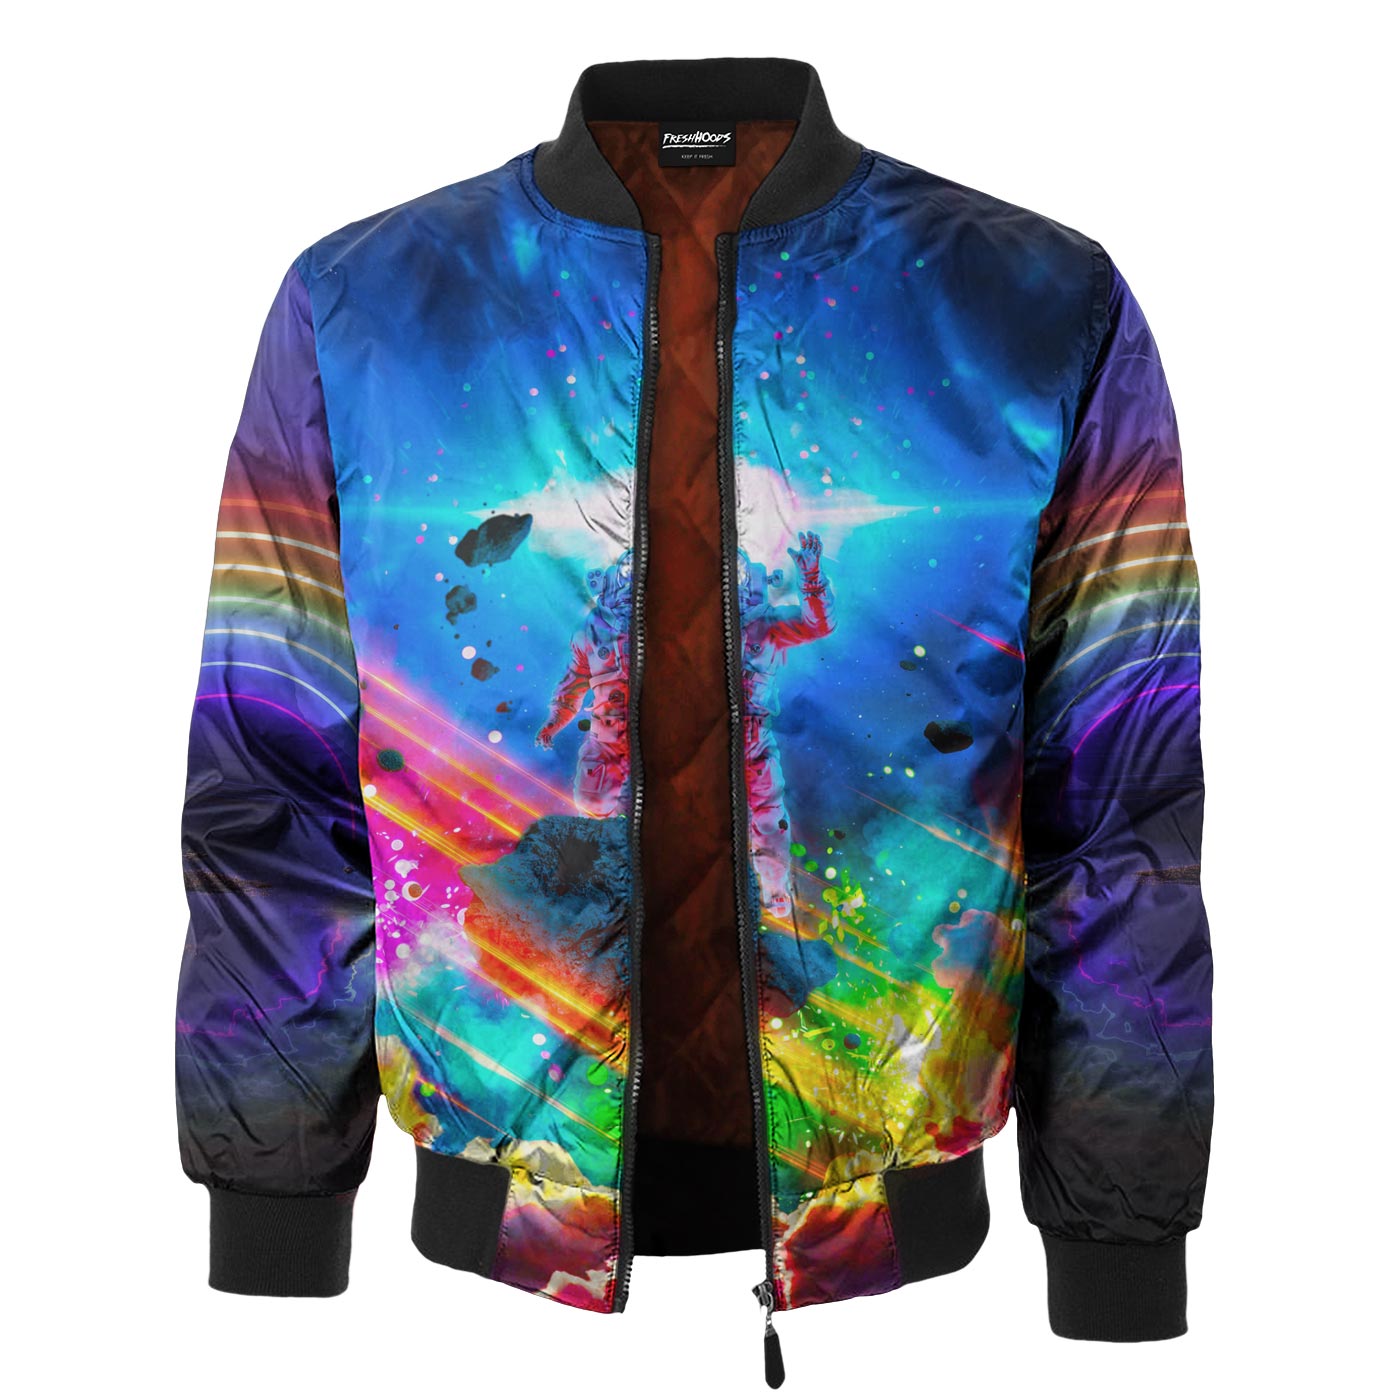 Subspace Frequency Bomber Jacket